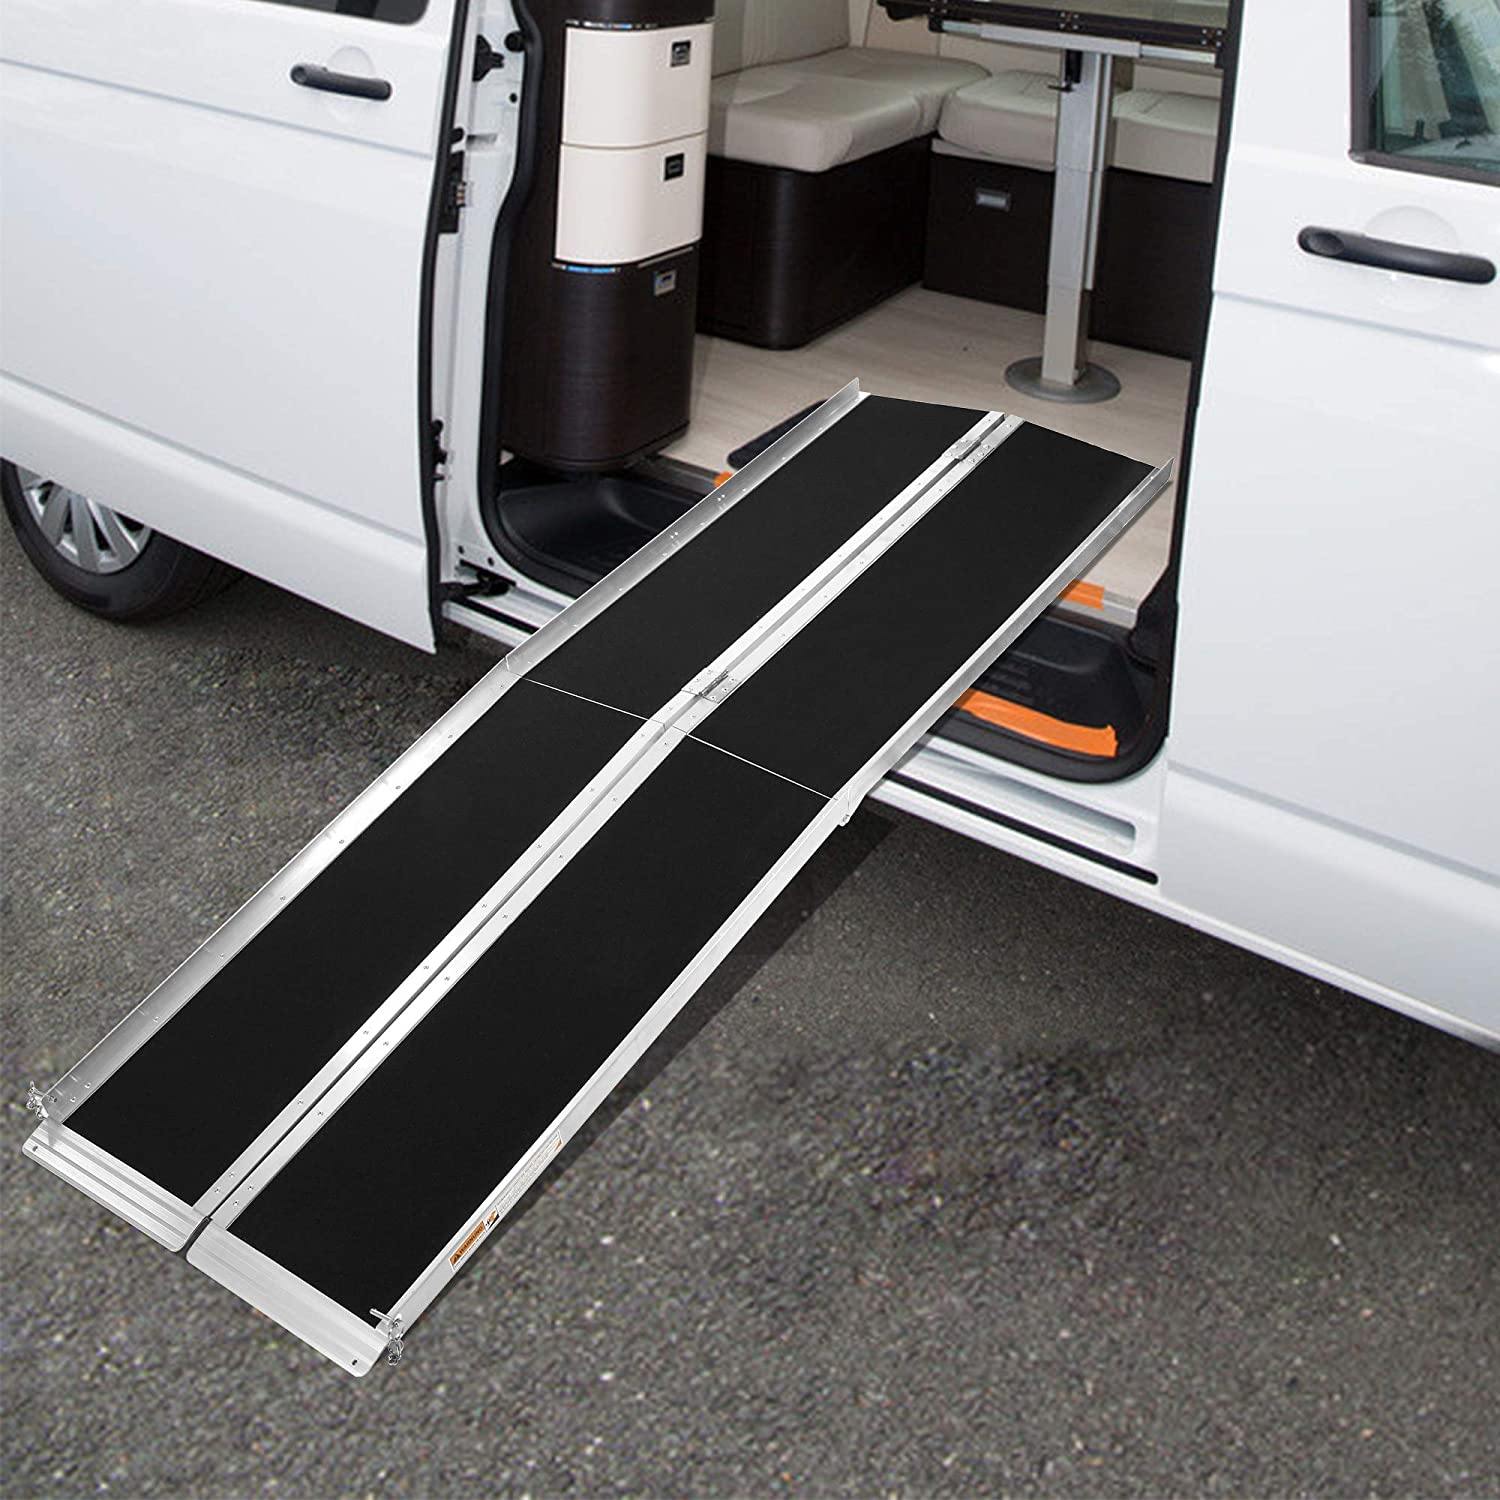 8Ft Ramp For Wheelchair, Multi-fold Wheelchair Ramps, w/Anti-Slip Carpeted Stairs, Mobility Handicap Suitcase For Doorways, Stairs, Mobility Scooter - Bosonshop